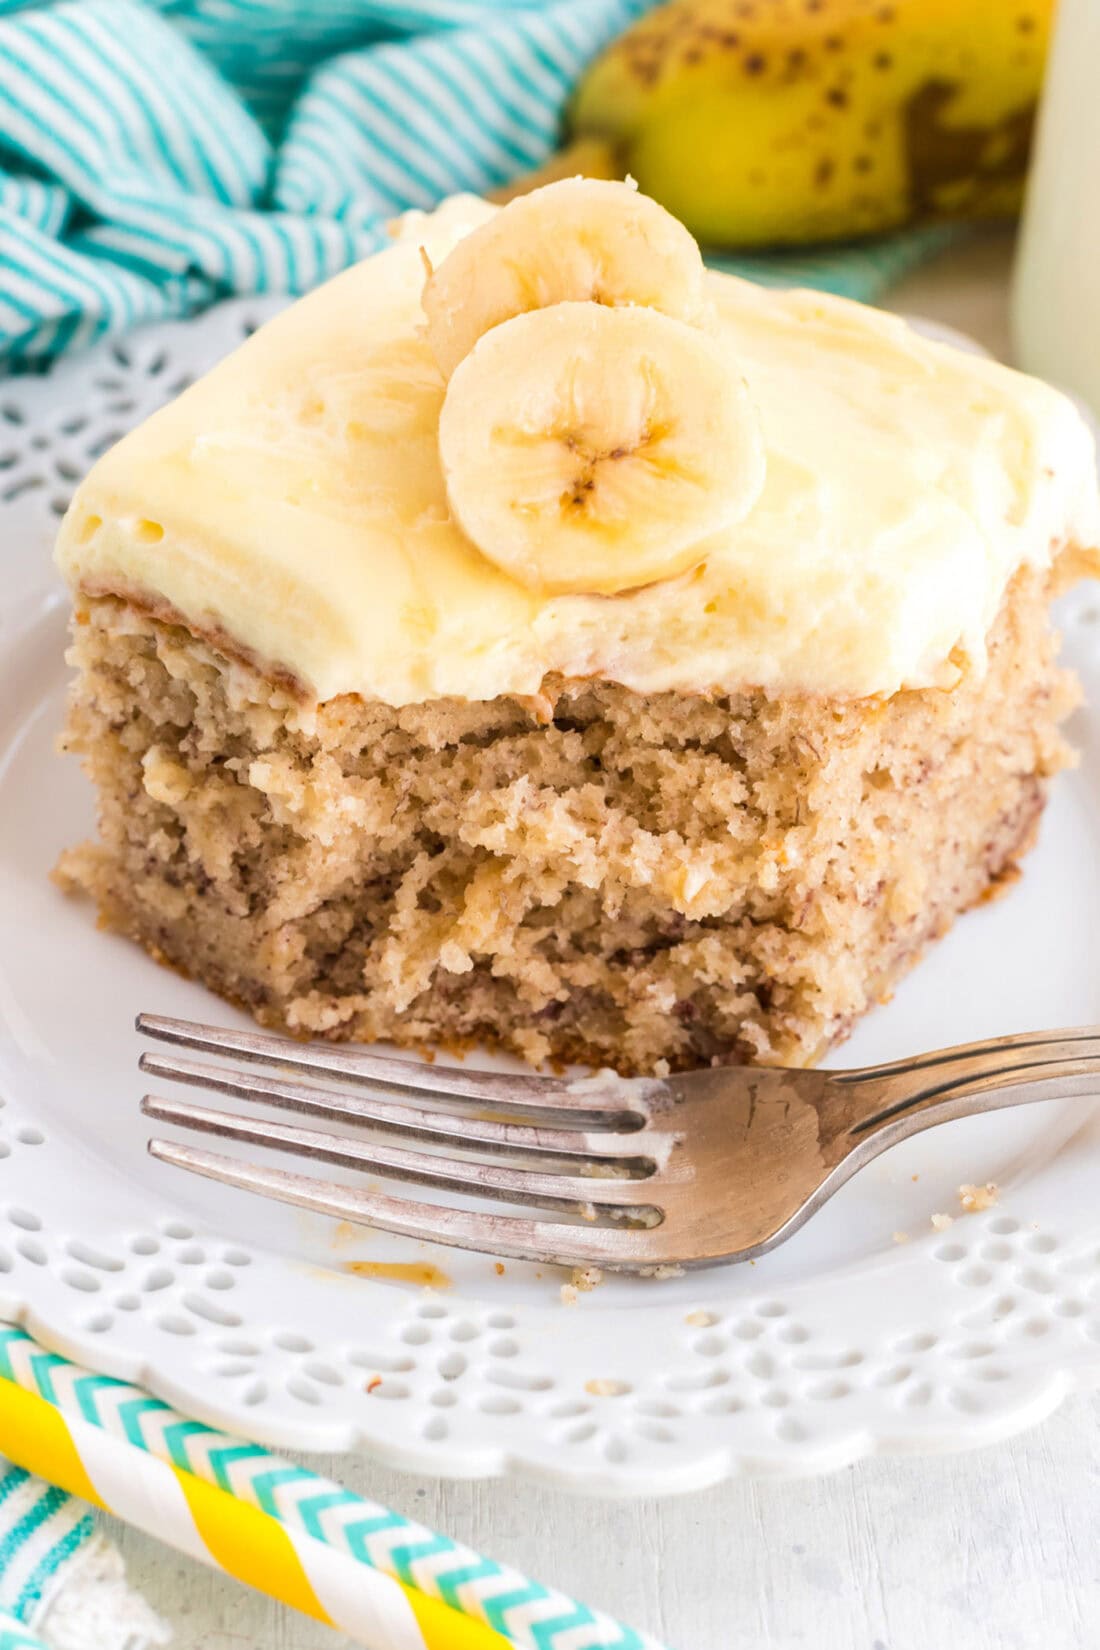 slice of banana cake with a bite out of it